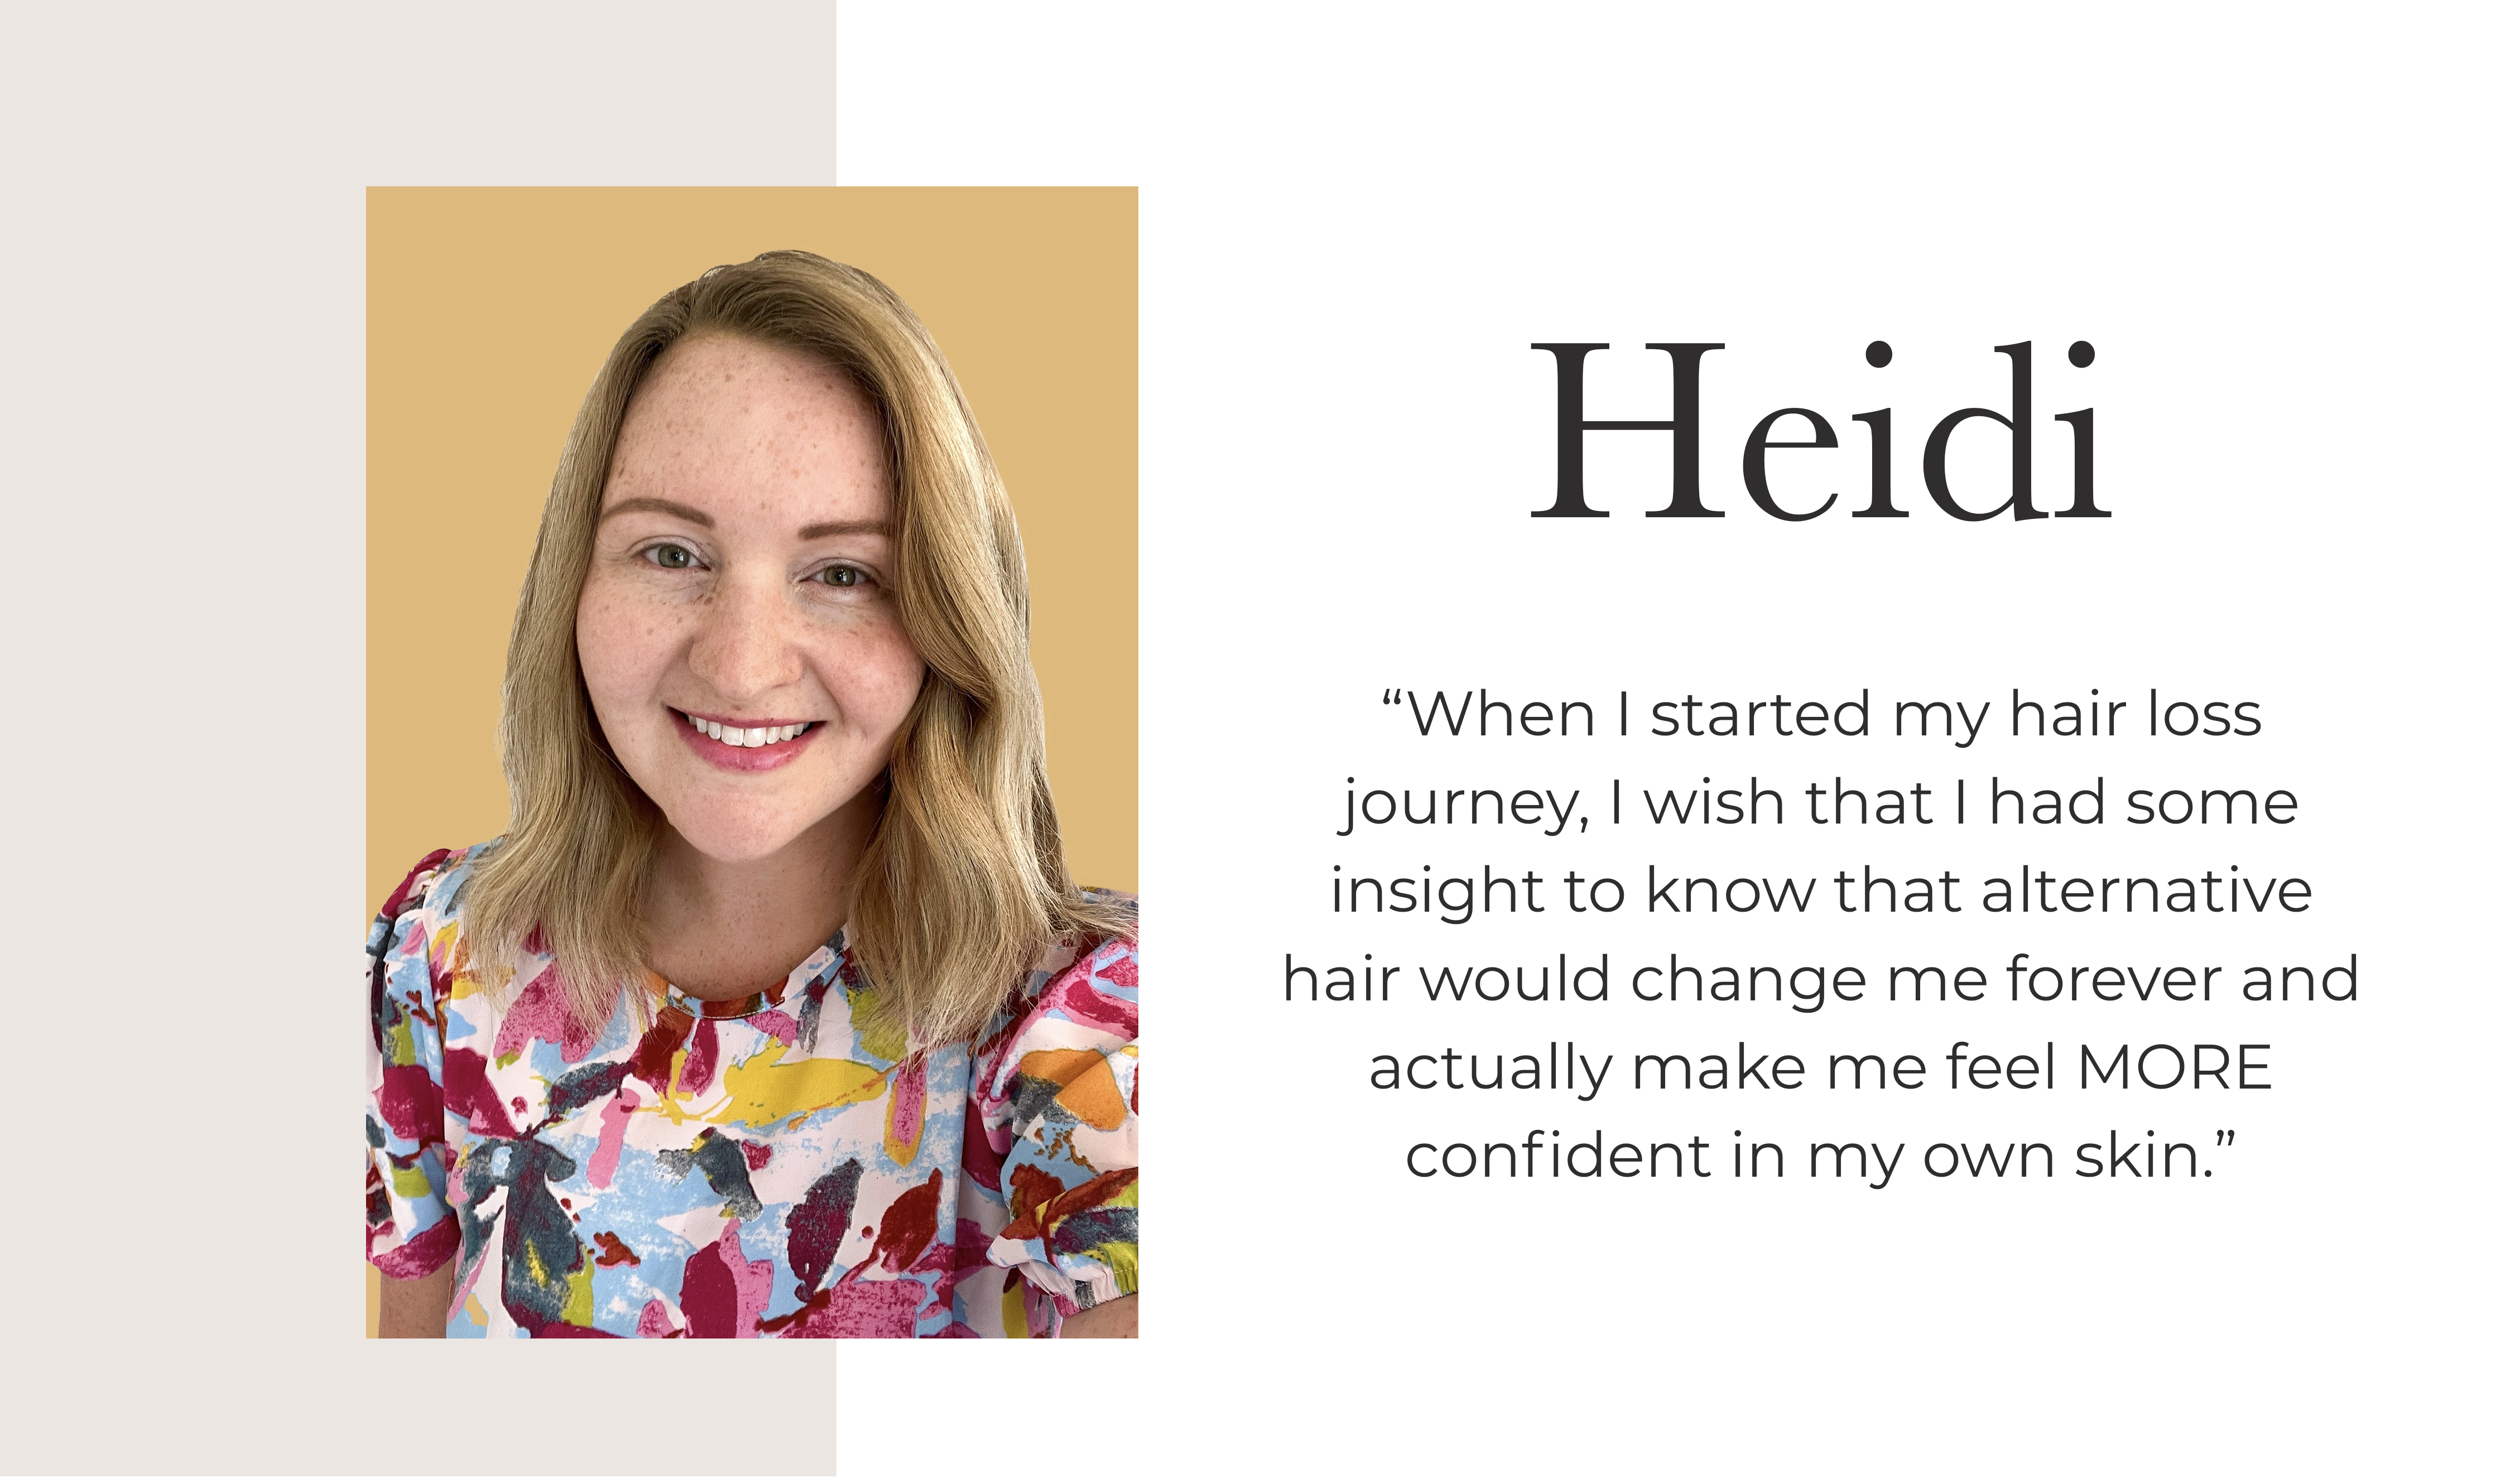 “When I started my hair loss journey, I wish that I had some insight to know that alternative hair would change me forever and actually make me feel MORE confident in my own skin.” 